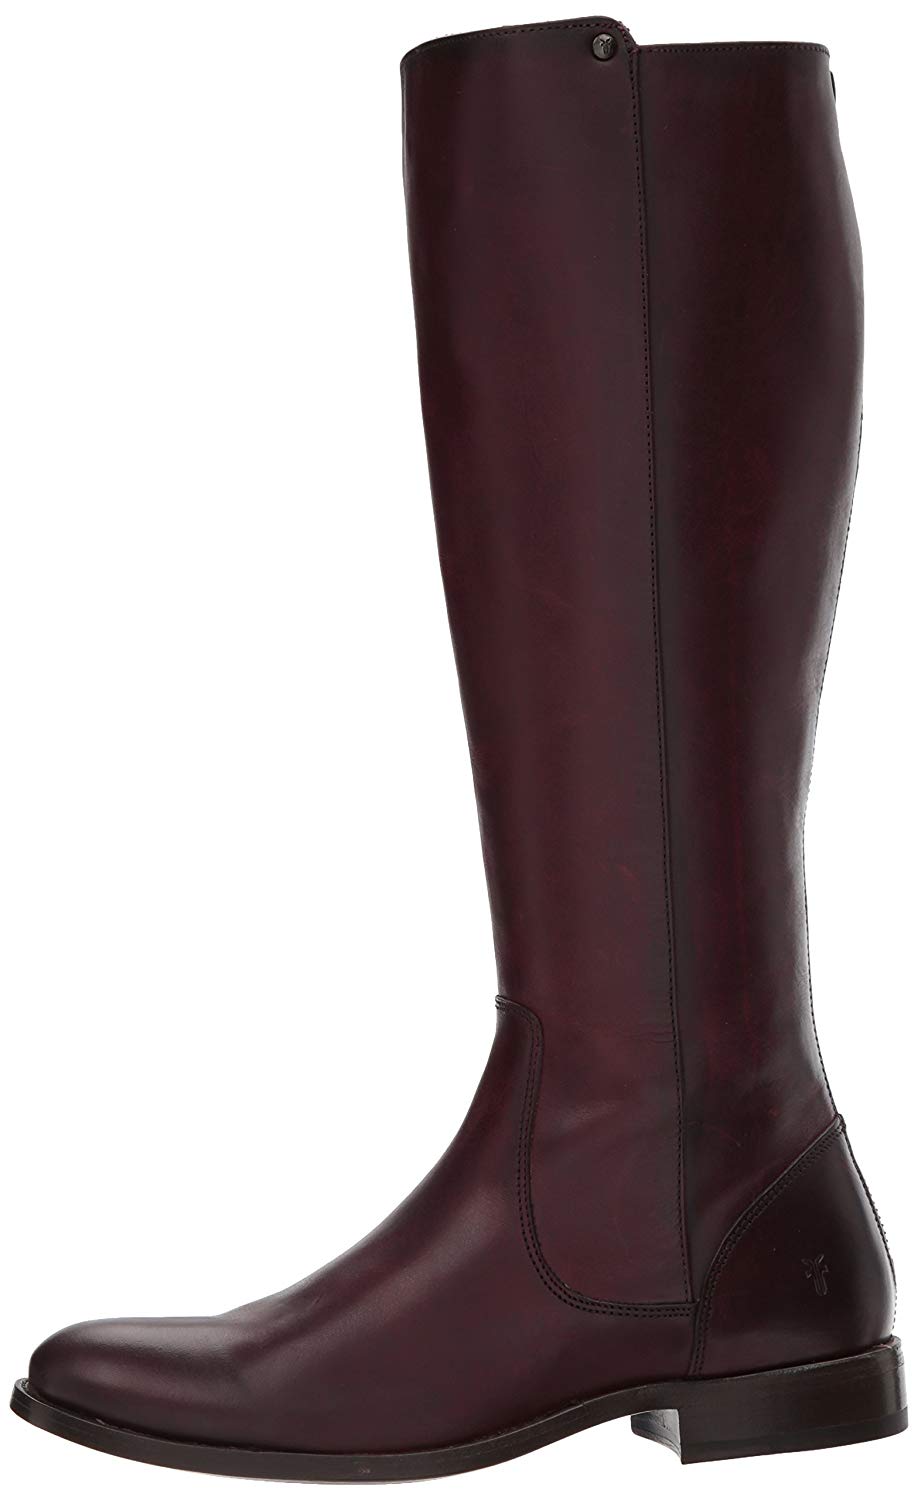 Melissa Stud Back Zip Riding Boot Shoes 